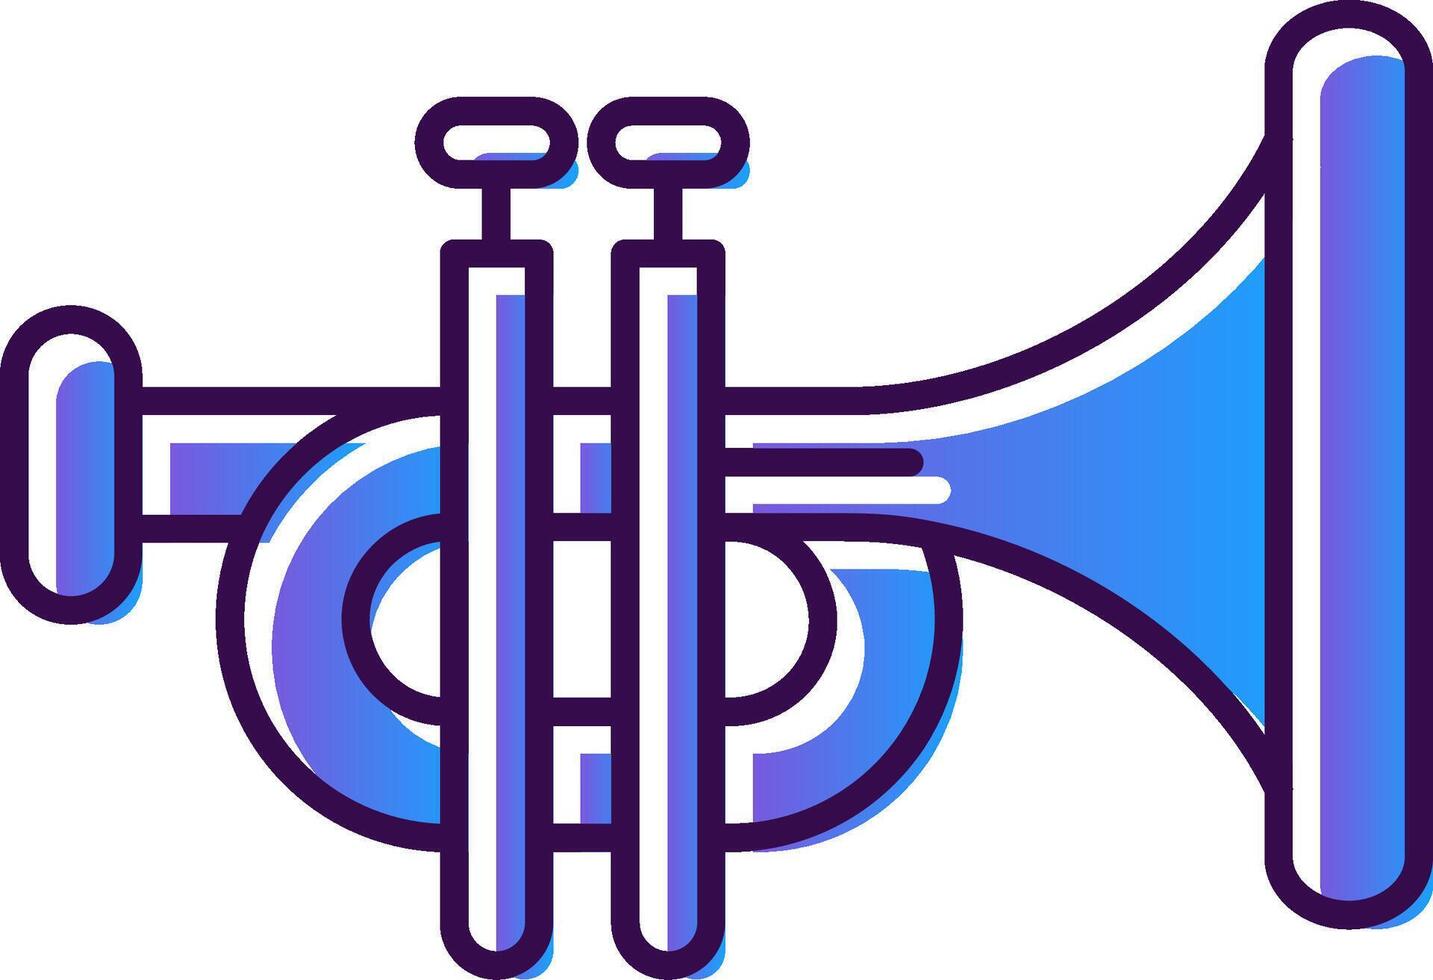 Trumpet Gradient Filled Icon vector